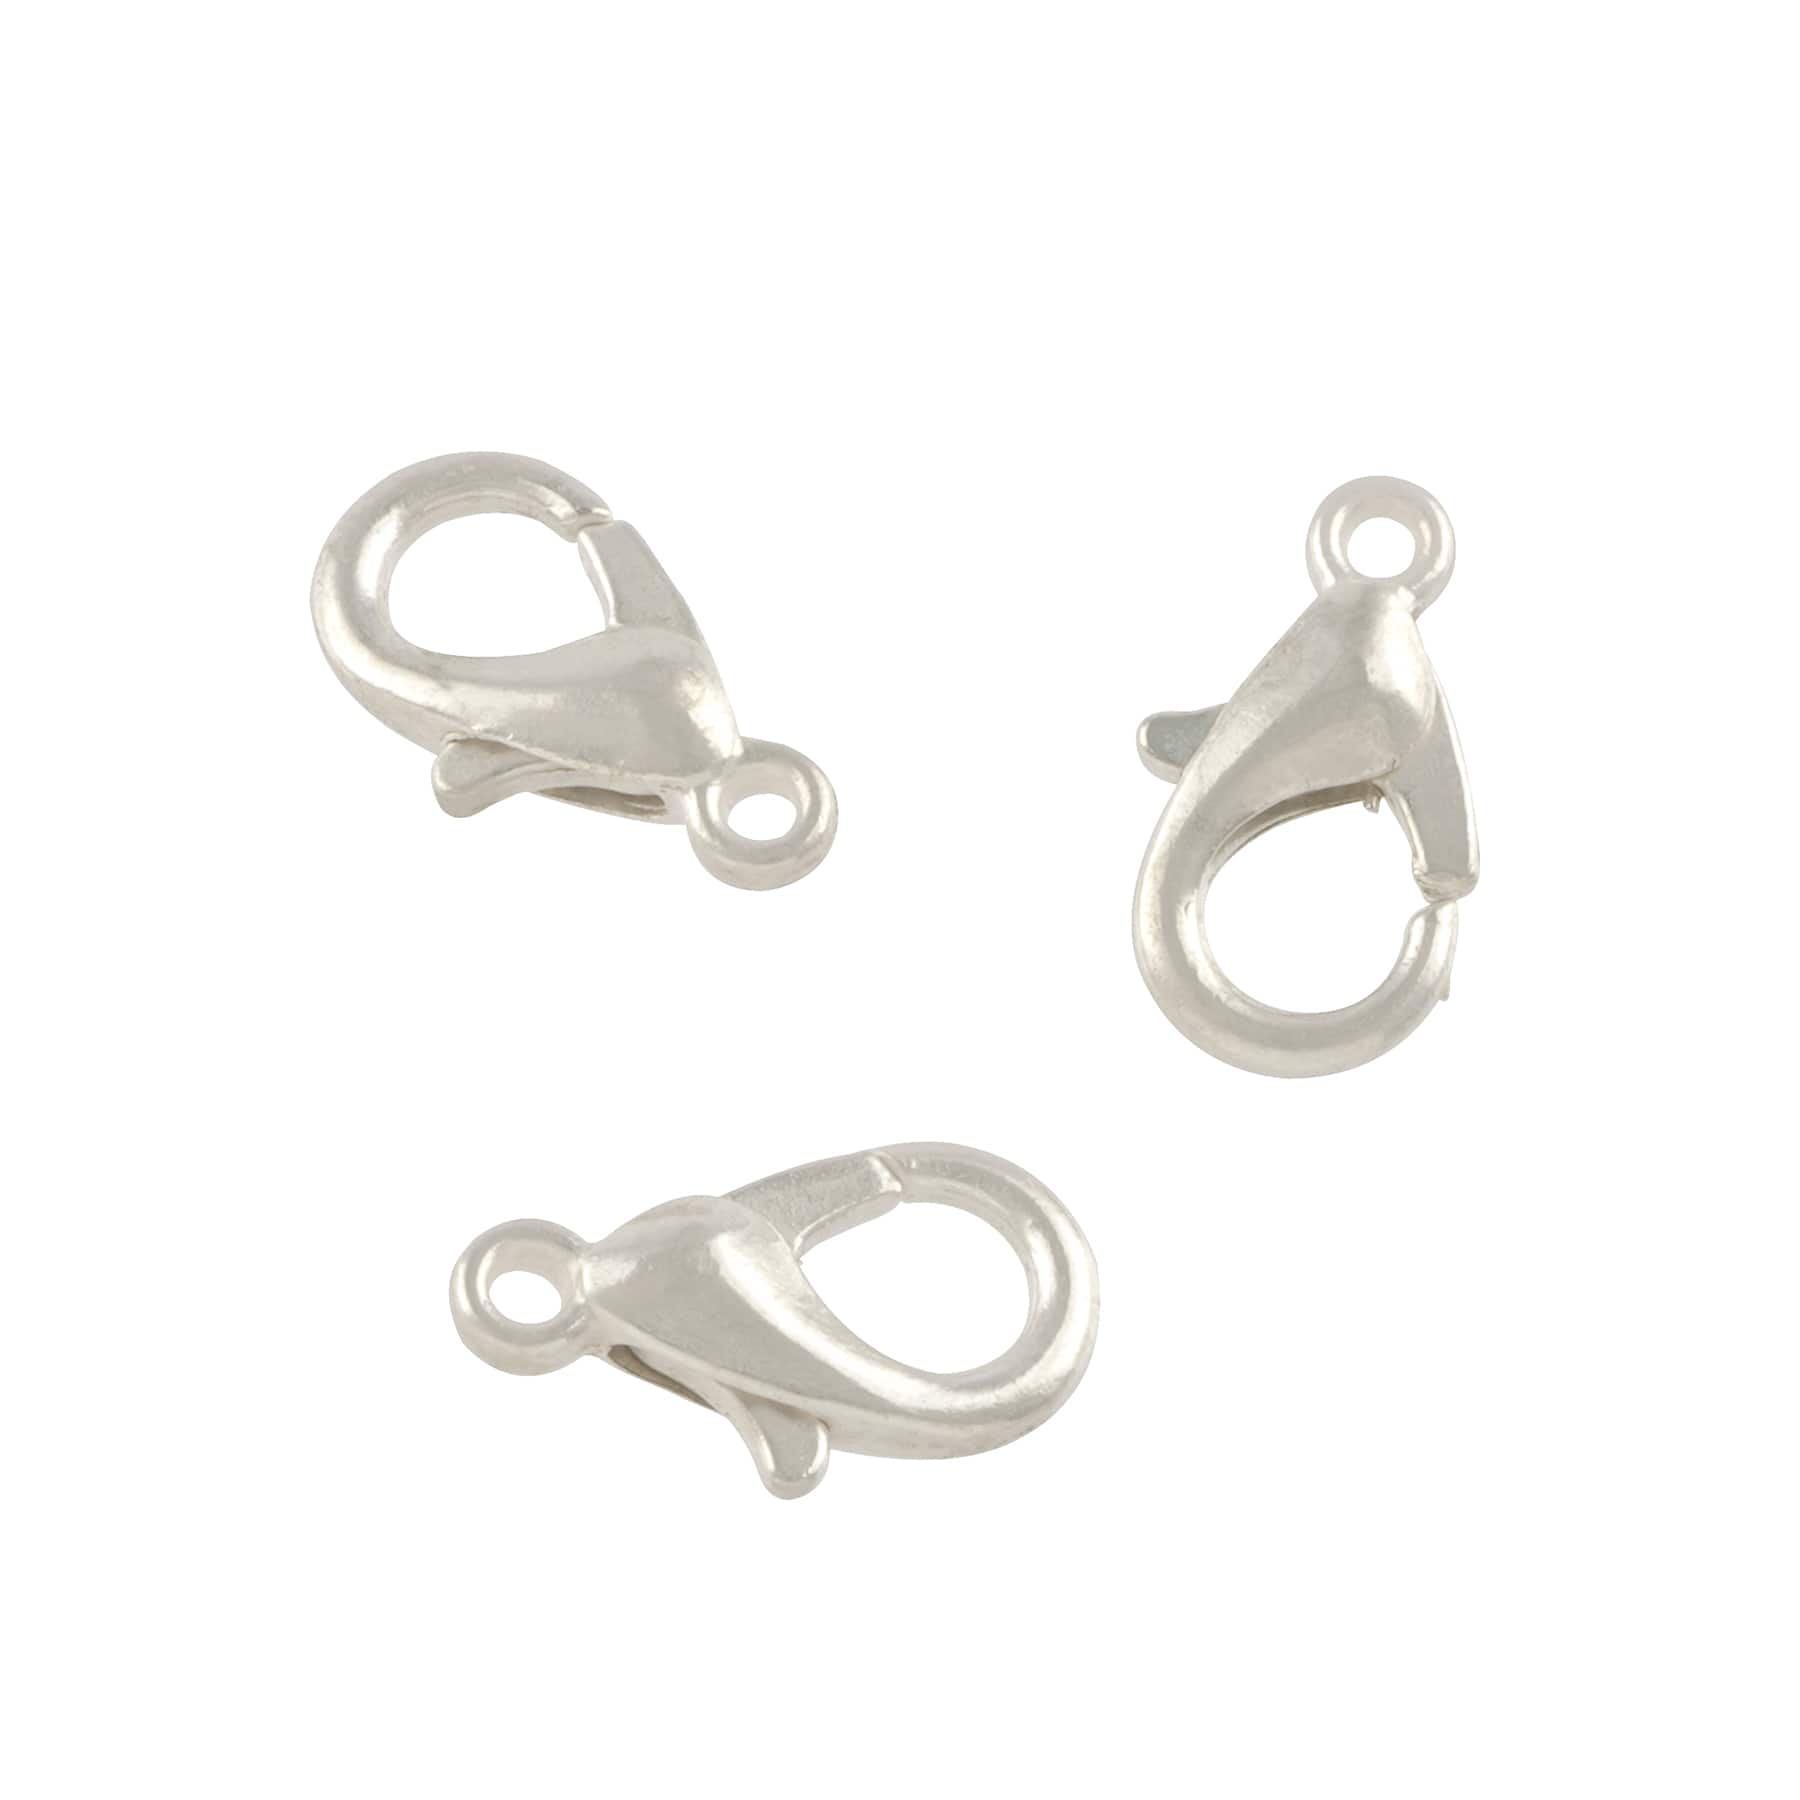 Lobster Claw Clasps by Bead Landing™